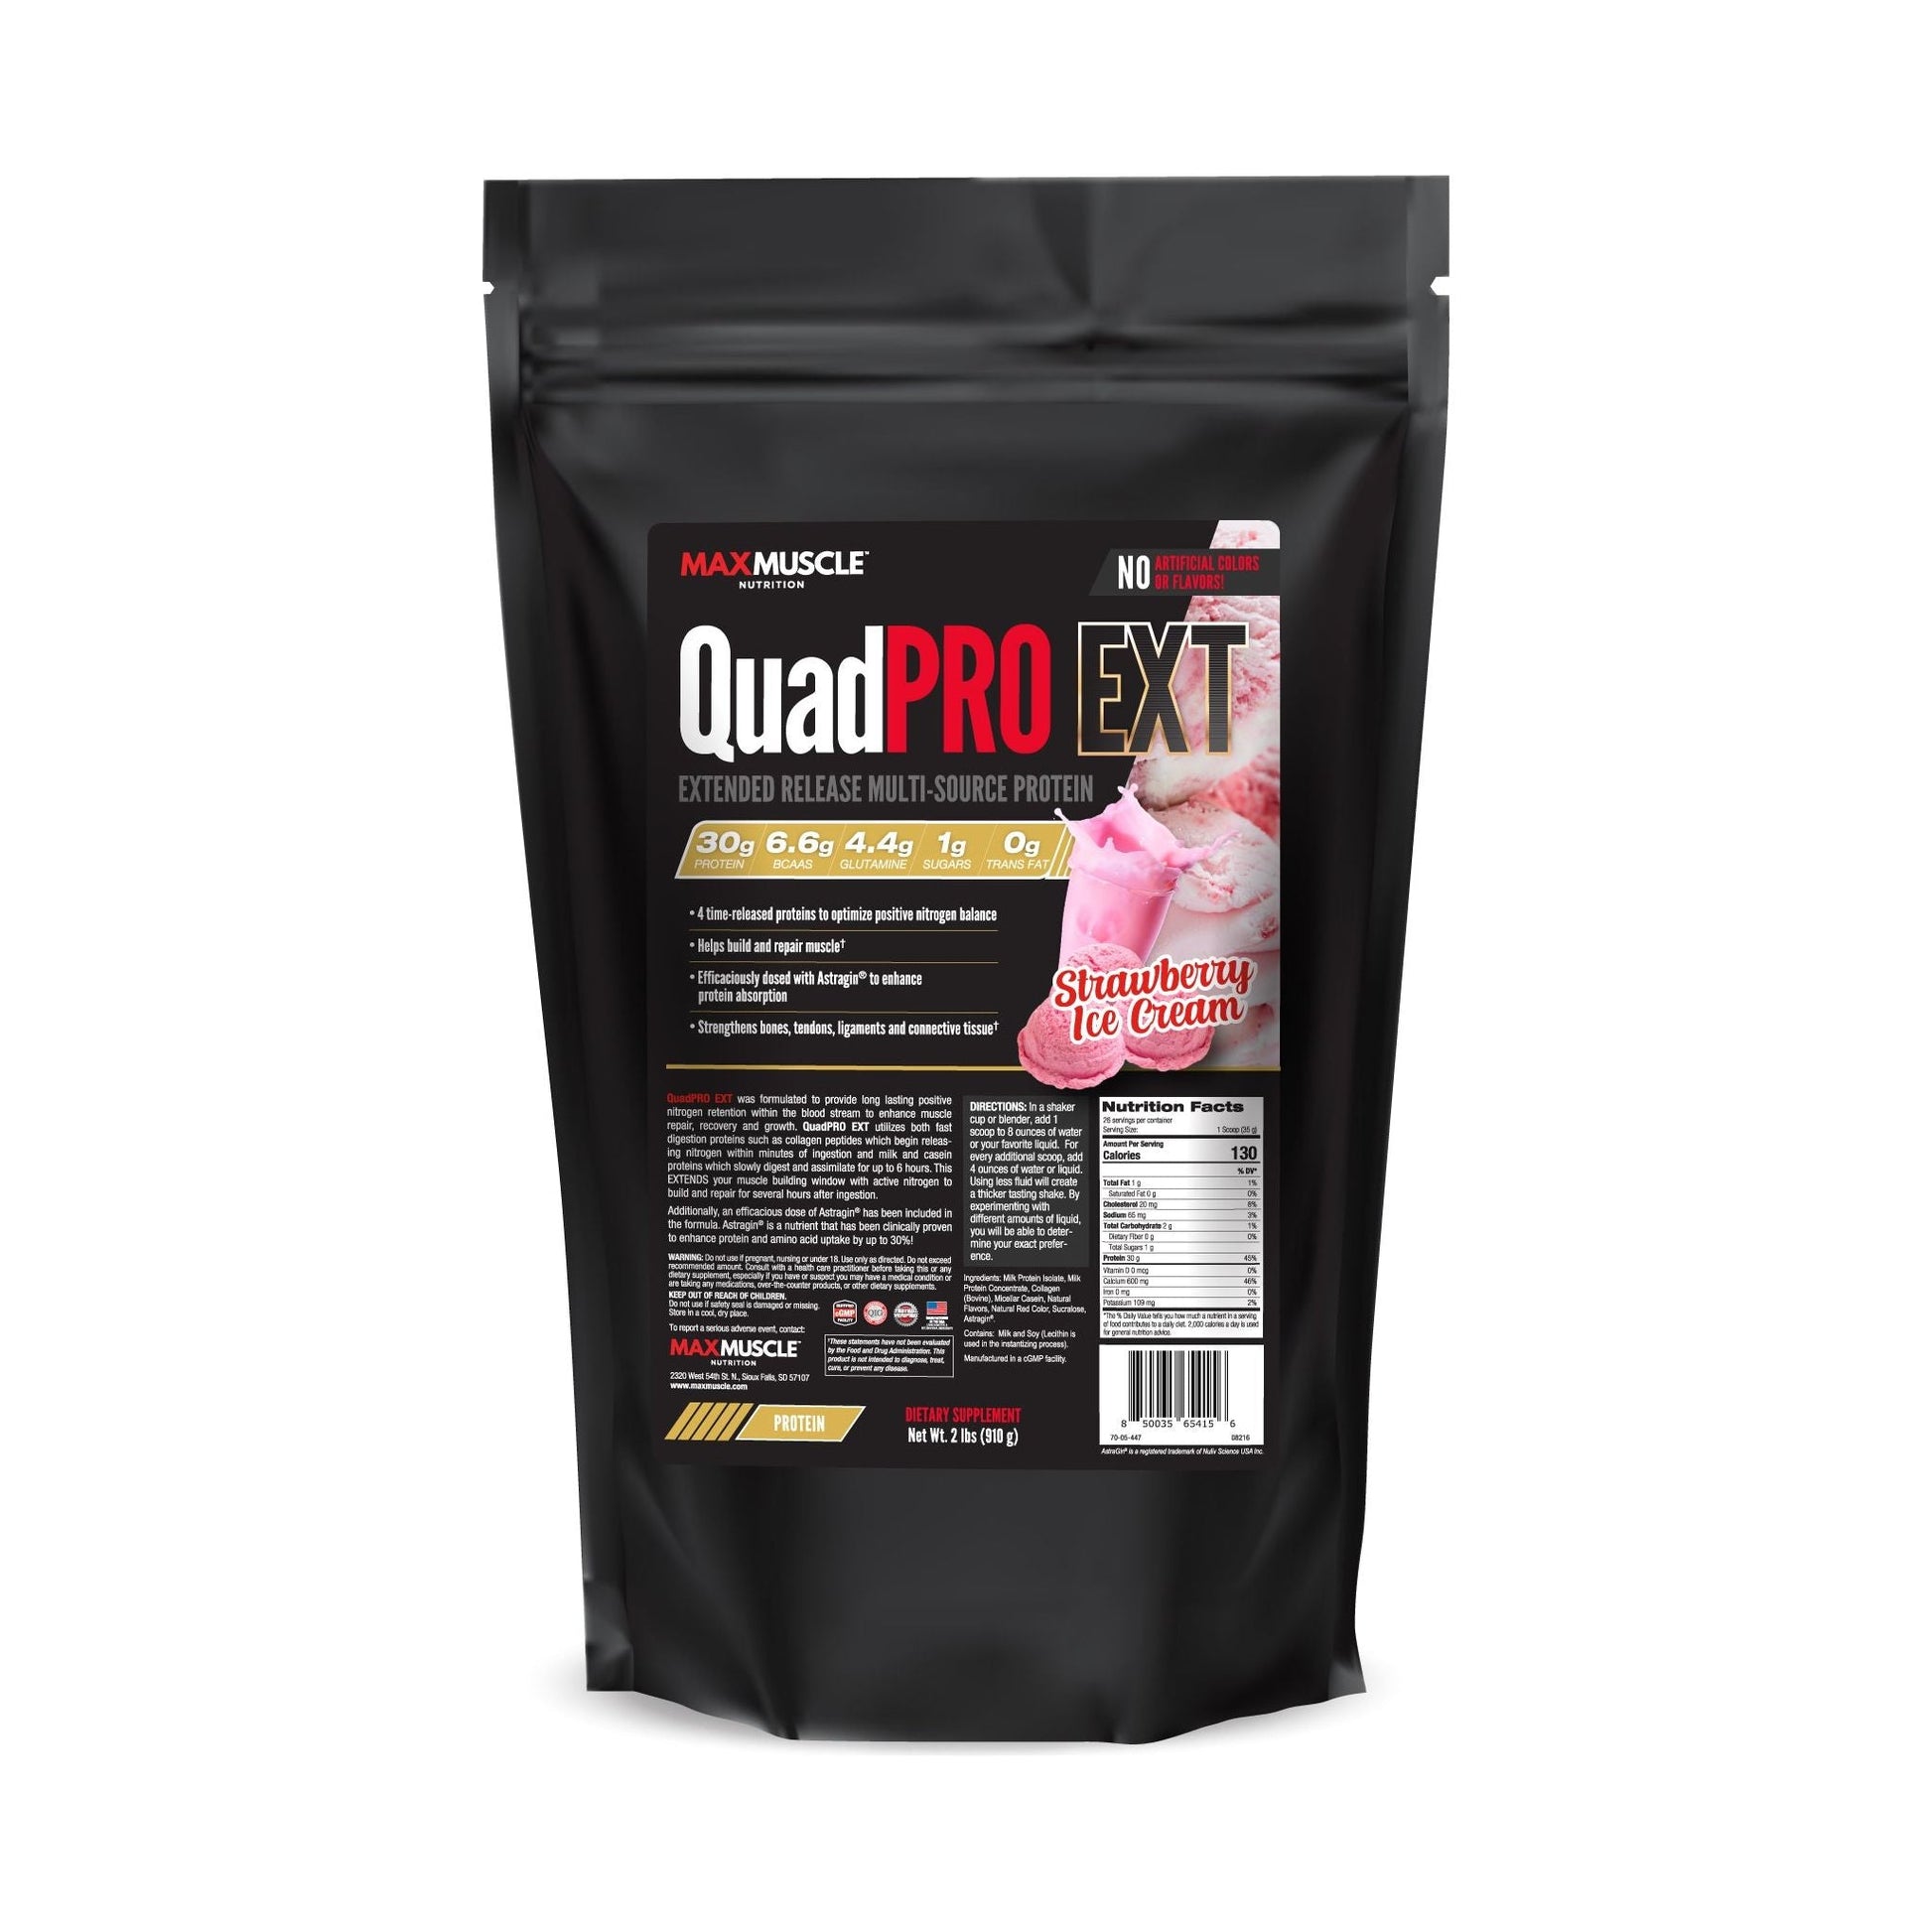 QuadPRO EXT | Buy 1 Get 1 Free Max Muscle Orlando